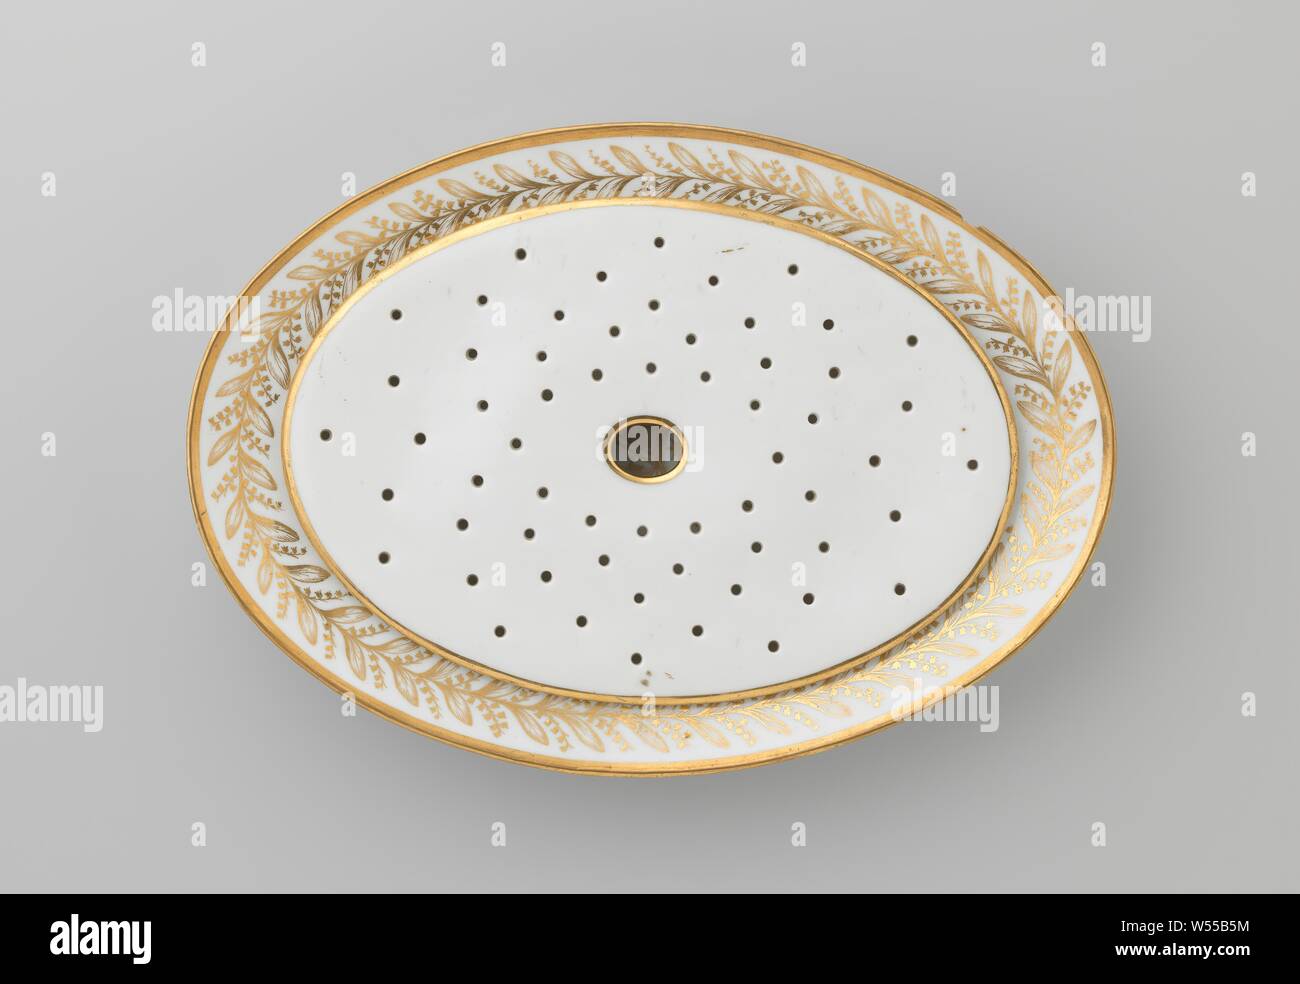 Drip tray with the coat of arms or Hendrik Peter Godfried Quack and Isabella Gertraud von Carnap, Leak plate of a porcelain fish dish, painted on the glaze with gold. With a golden border and a large hole in the center surrounded by small holes. Two rings and baking sand on the bottom., E. Blancheron, c. 1790 - c. 1800, porcelain (material), glaze, gold (metal), vitrification, h 1 cm w 33.1 cm × d 22.9 cm Stock Photo